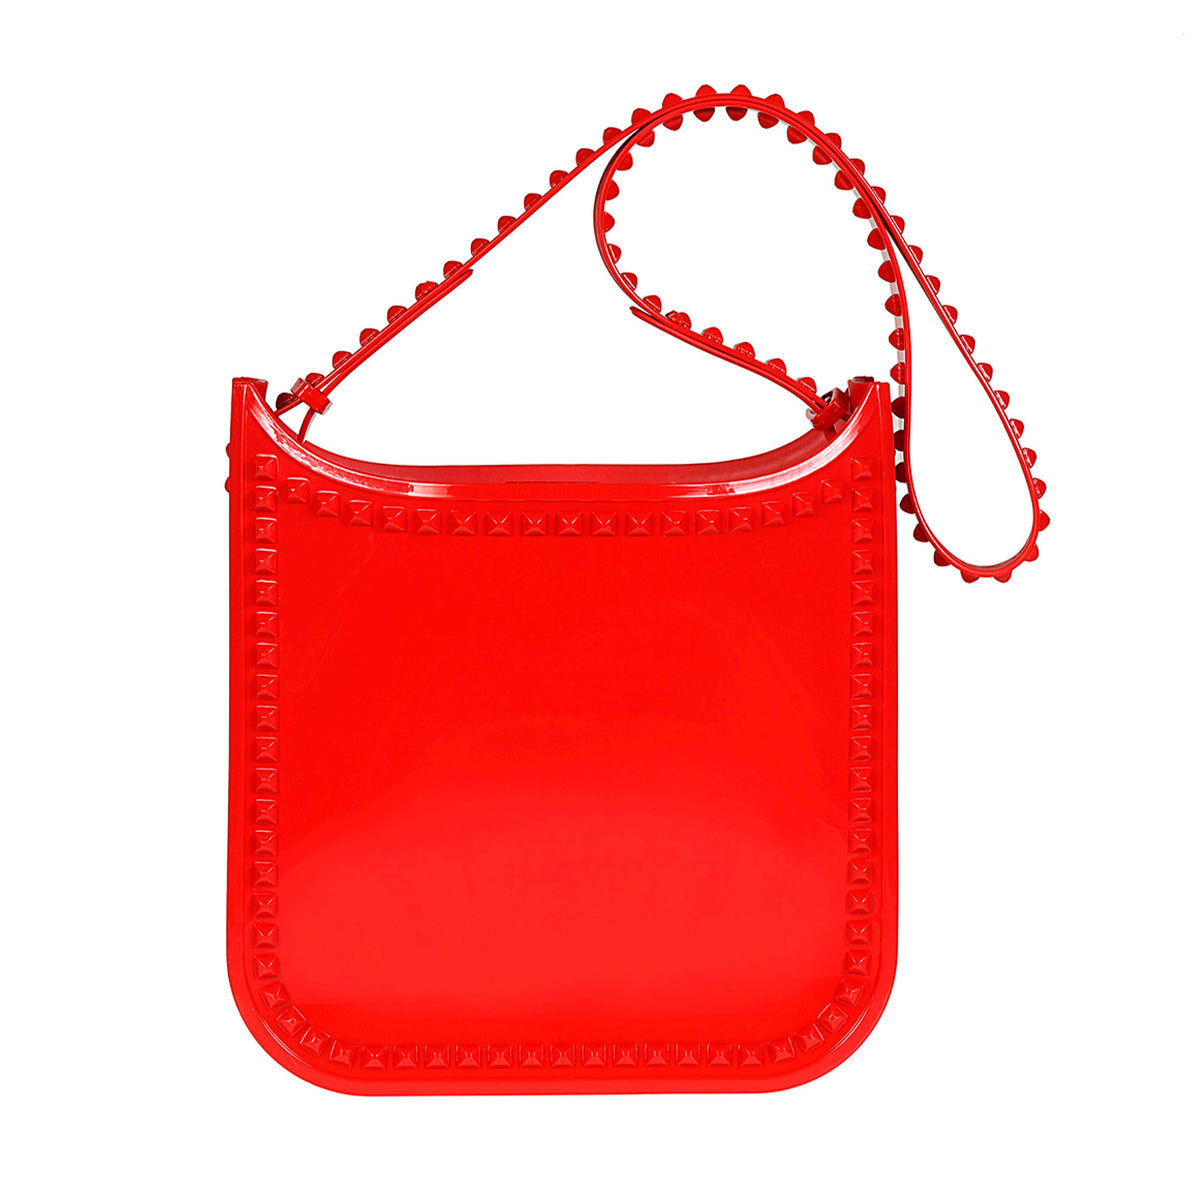 Fico studded purse in red from Carmen Sol